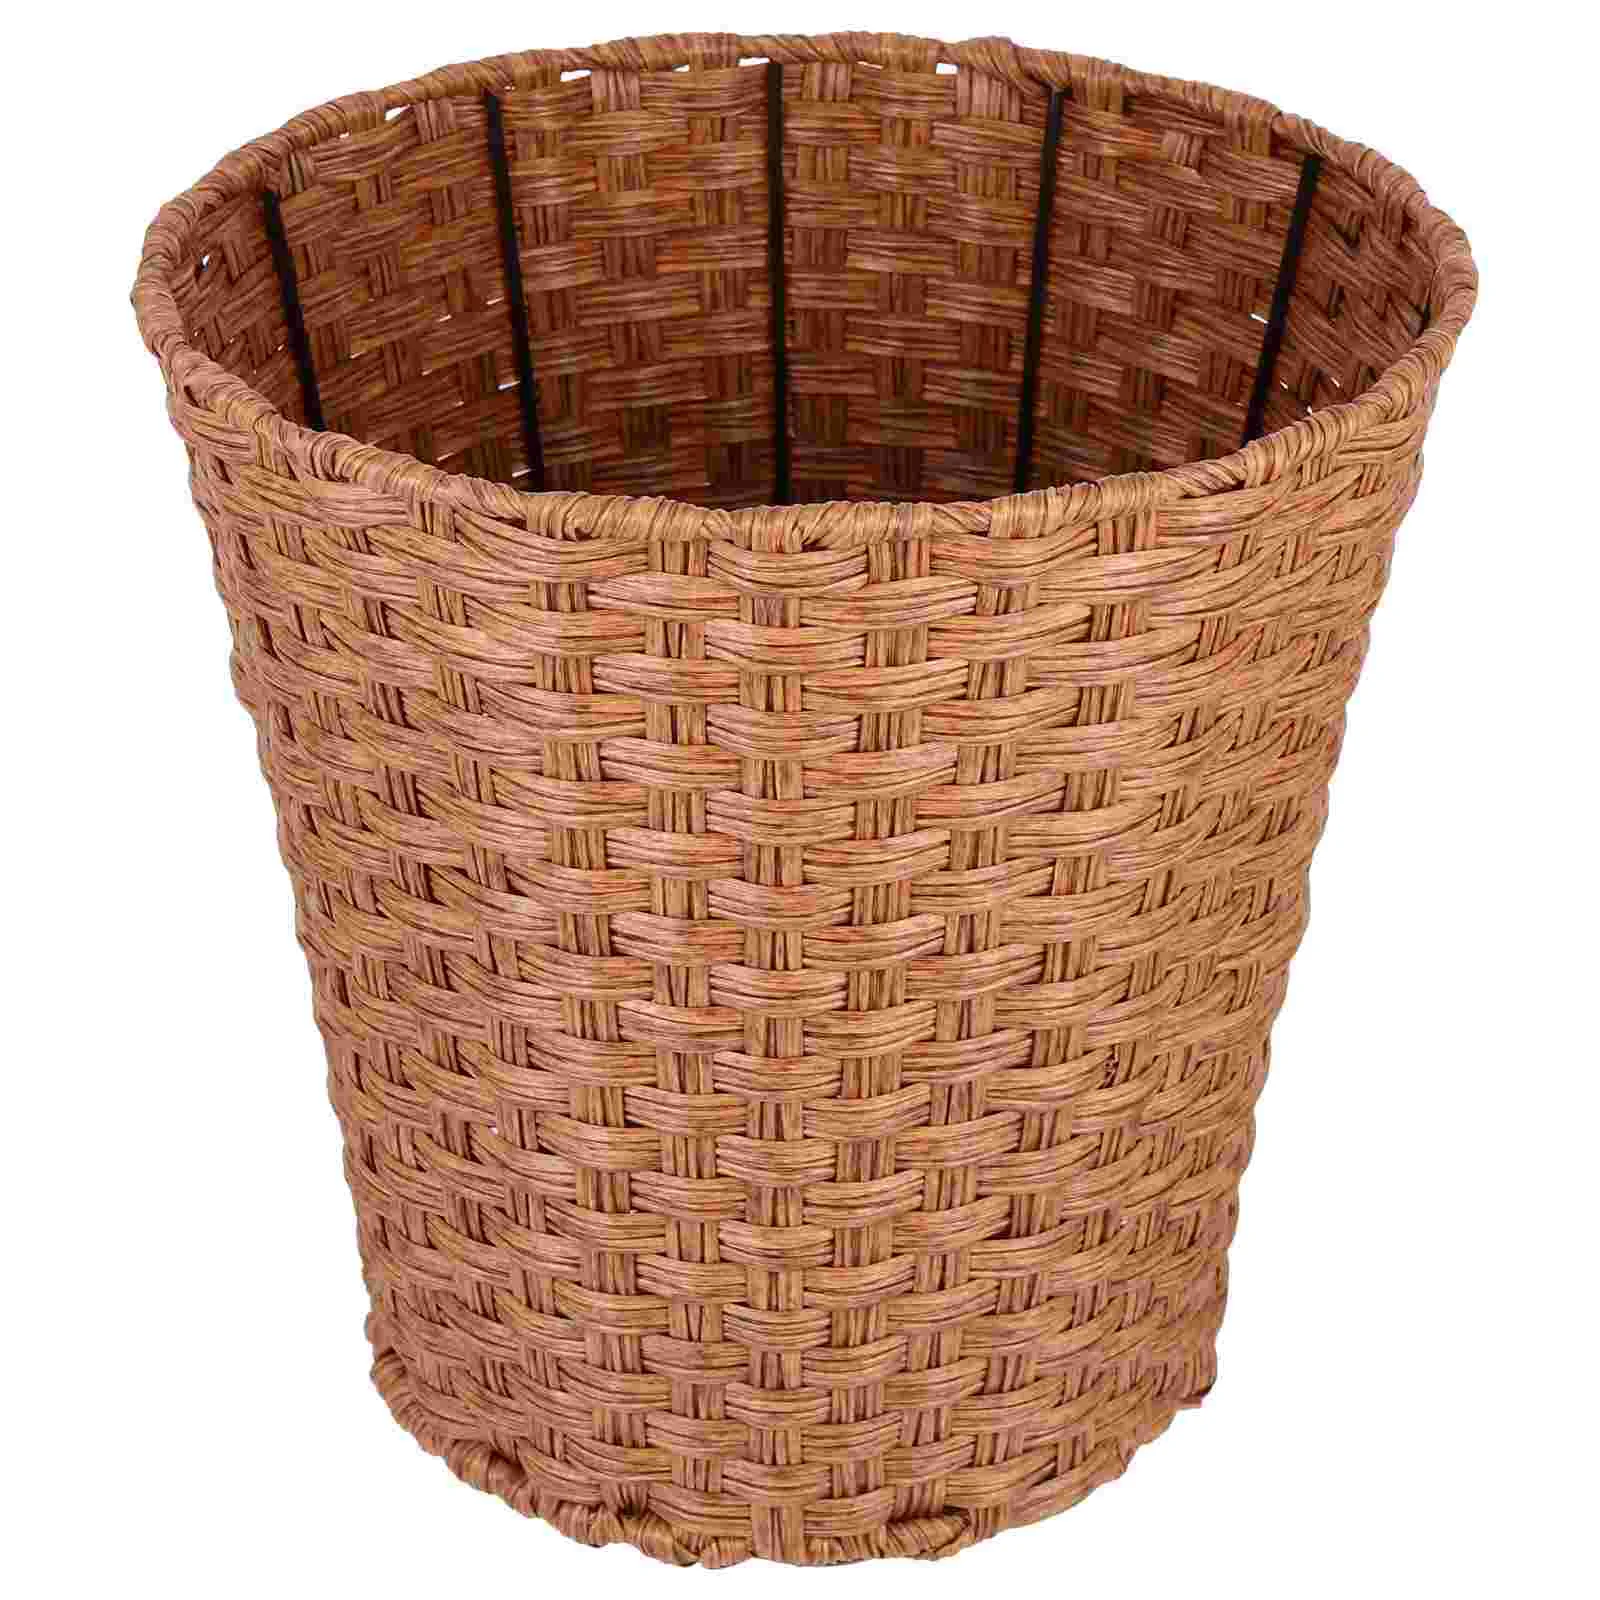 

Basket Storage Waste Woven Bin Baskets Wicker Hamper Clothes Trash Can Garbage Rattan Dirty Toy Decorative Sundries Laundry